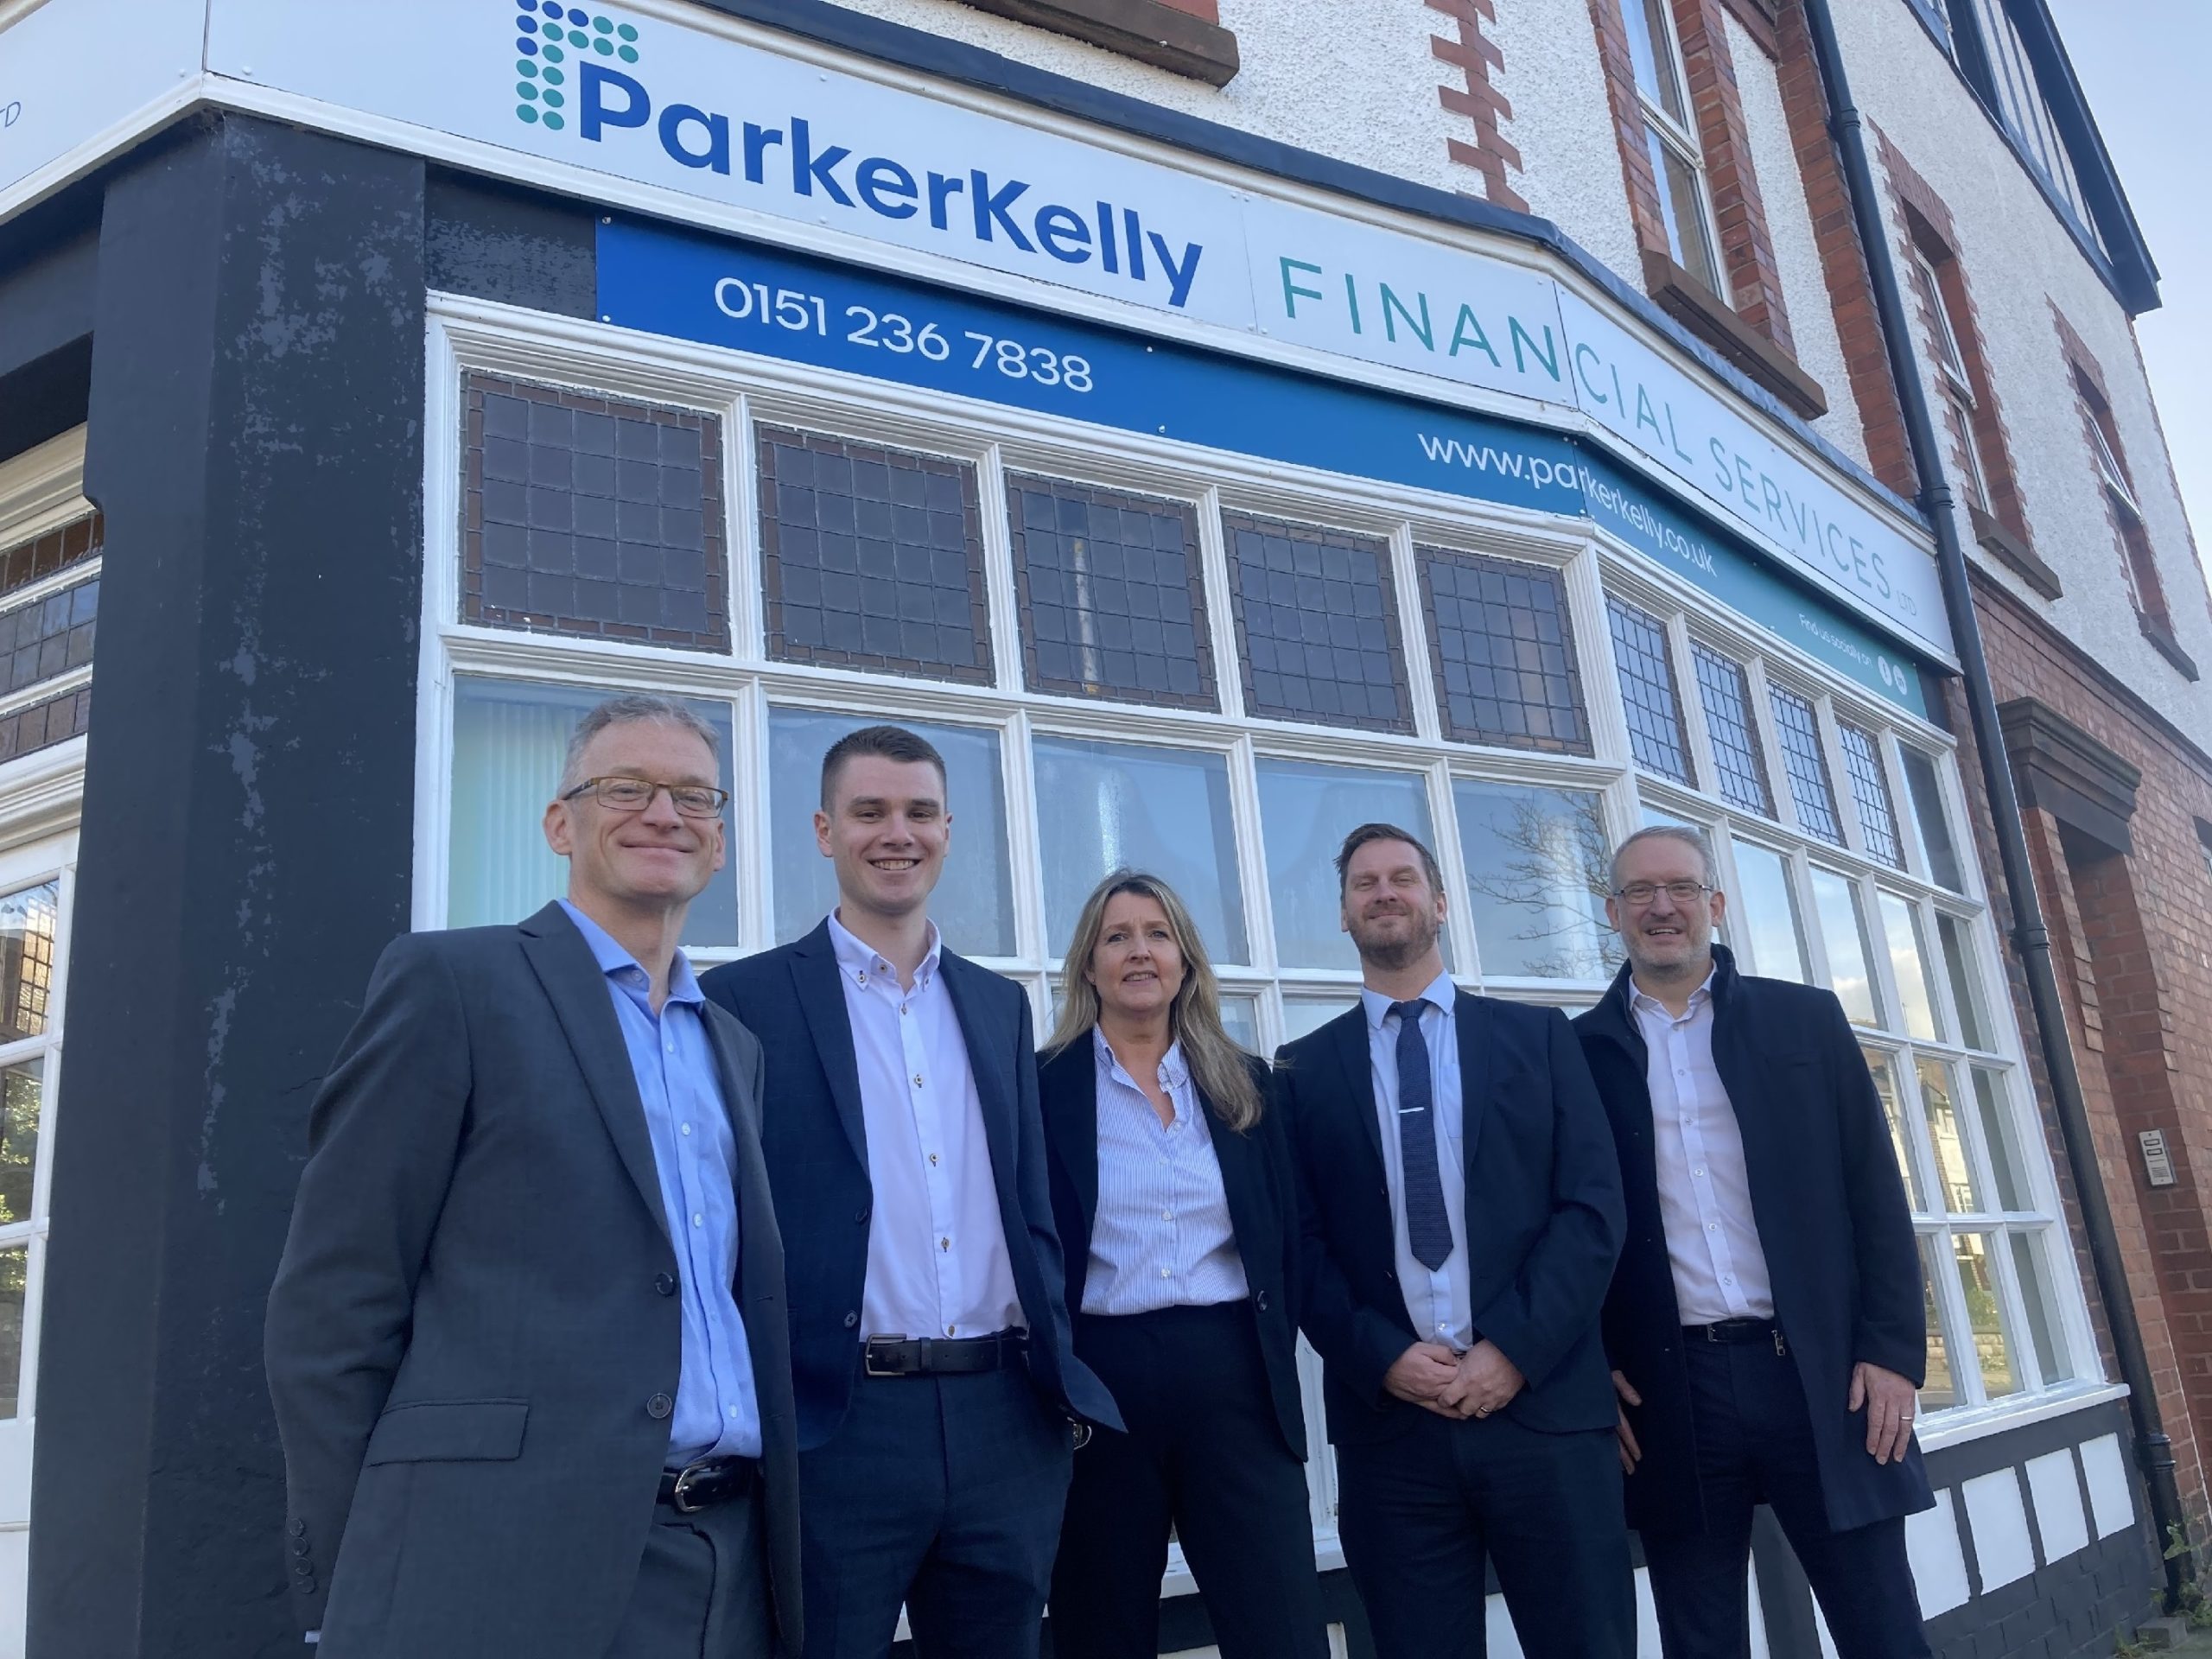 Parker Kelly Financial Services opens in West Kirby